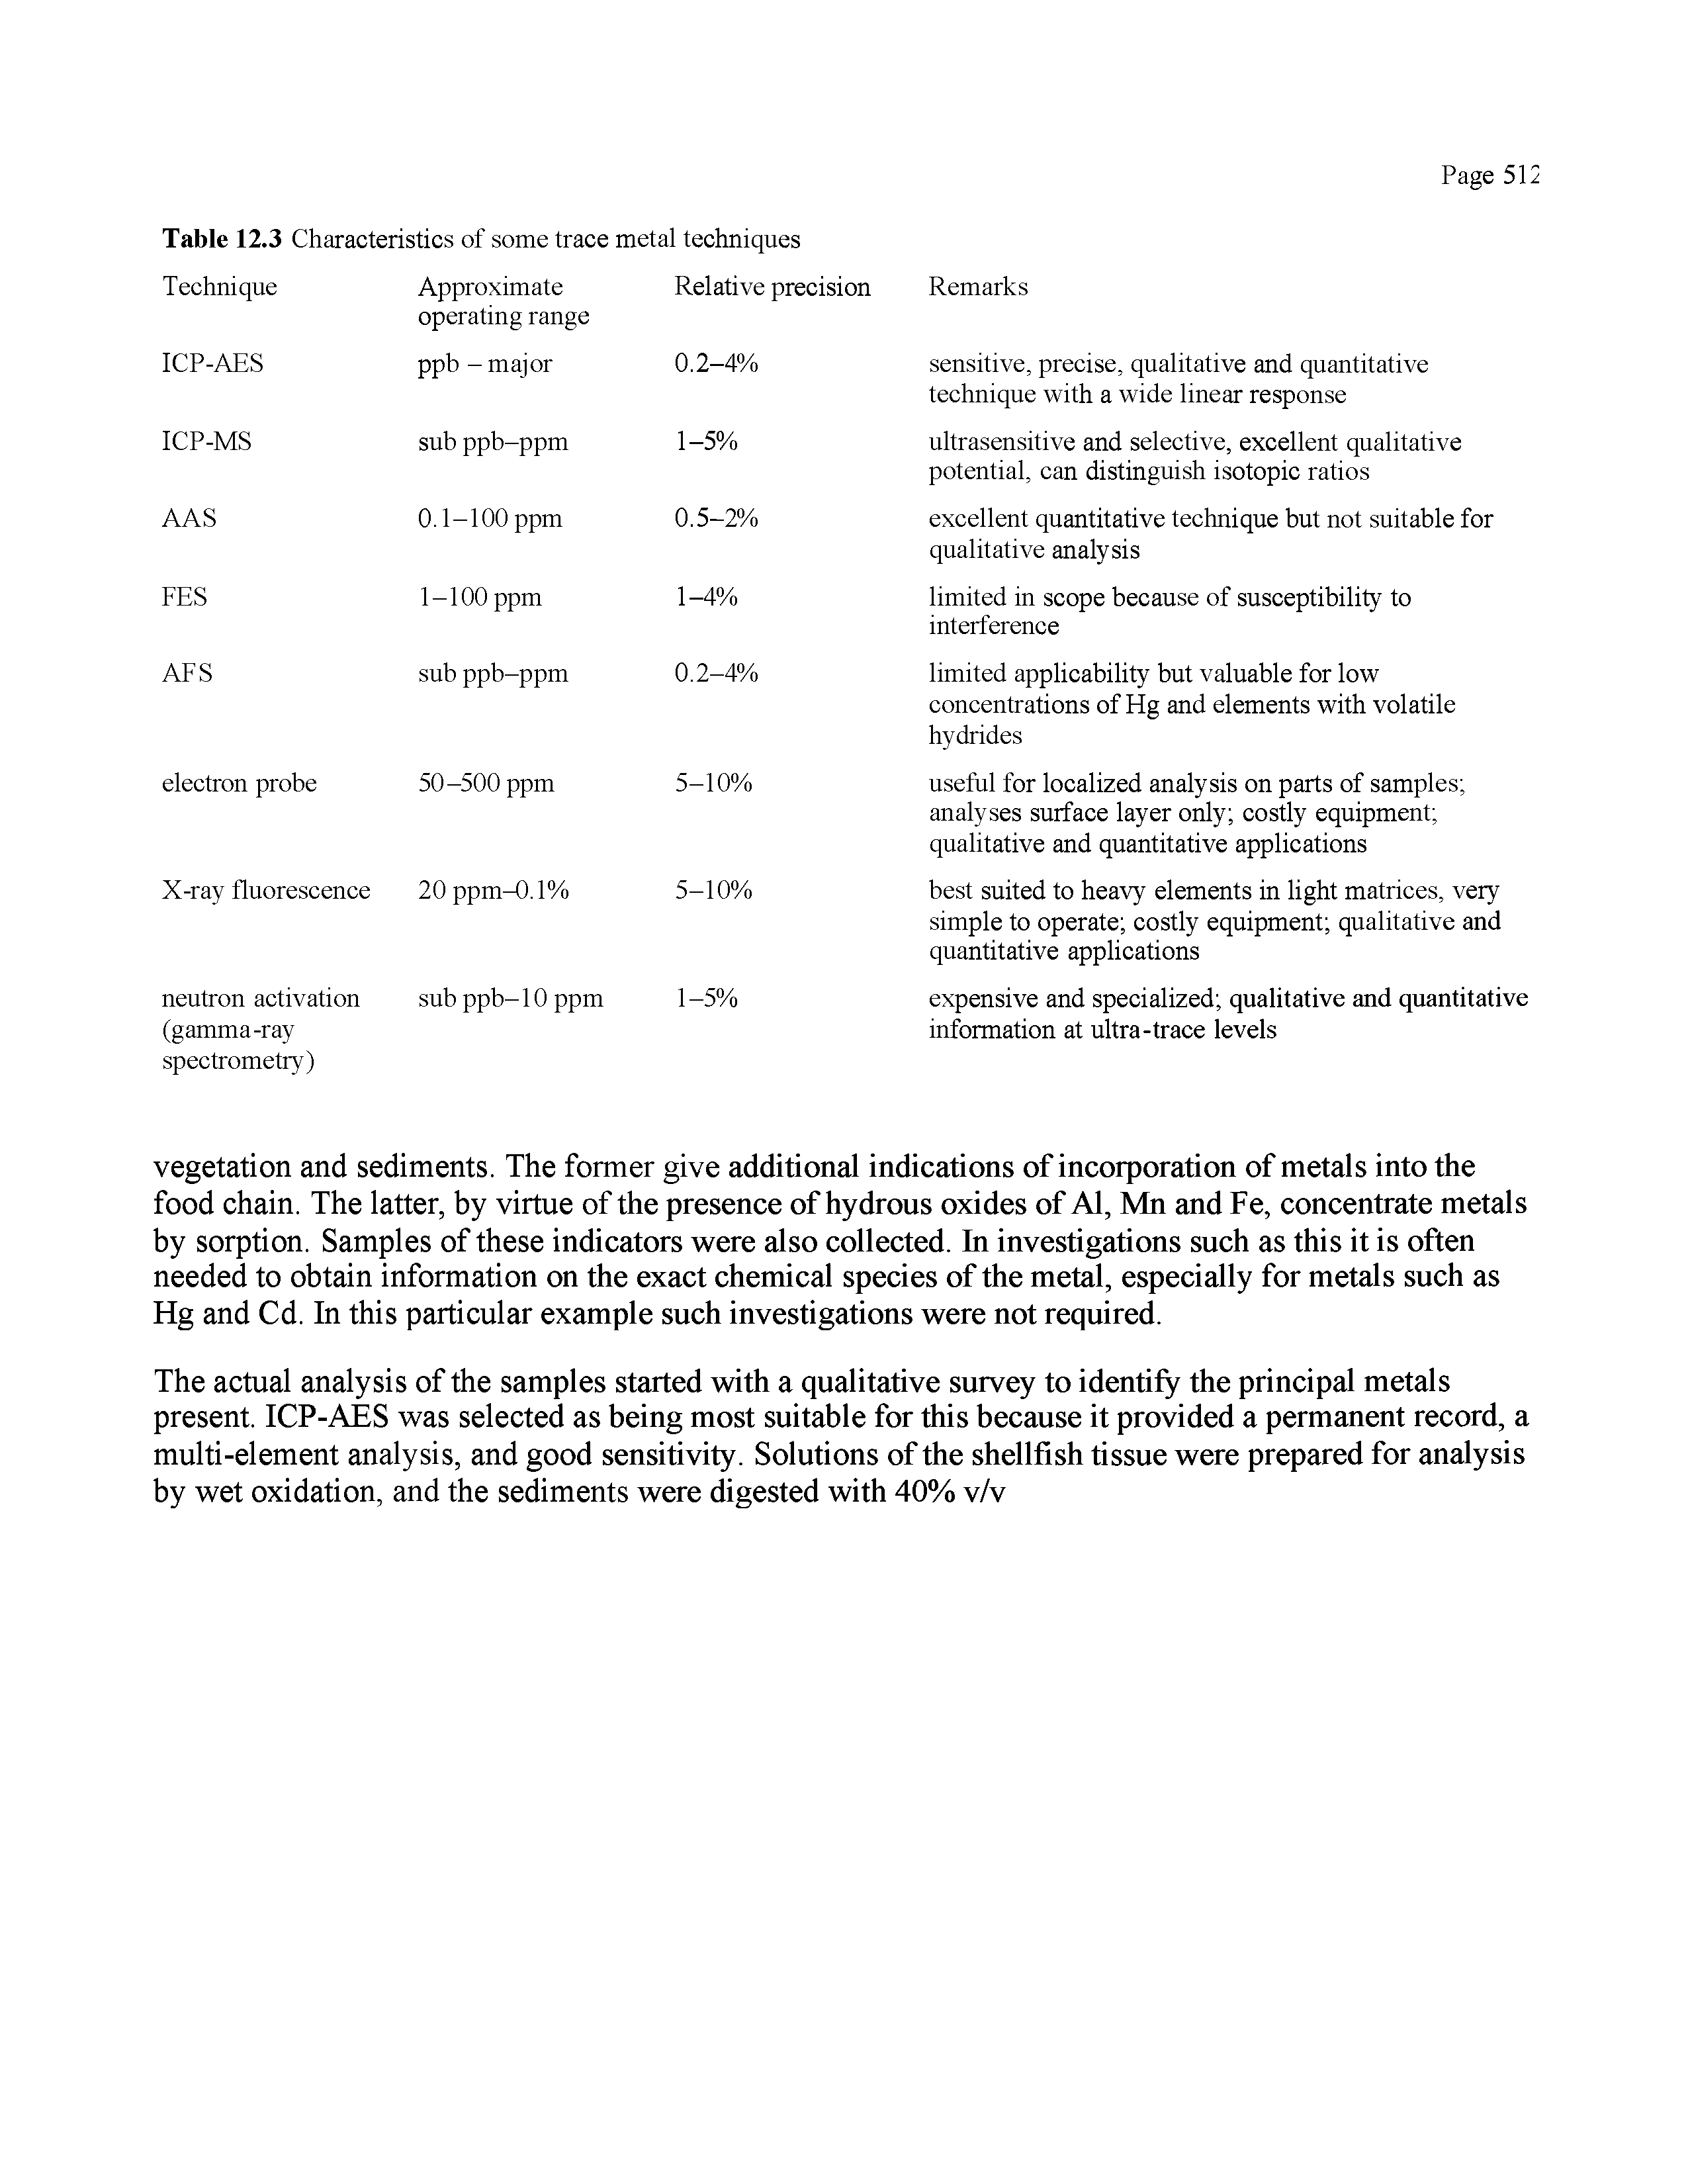 Table 12.3 Characteristics of some trace metal techniques ...